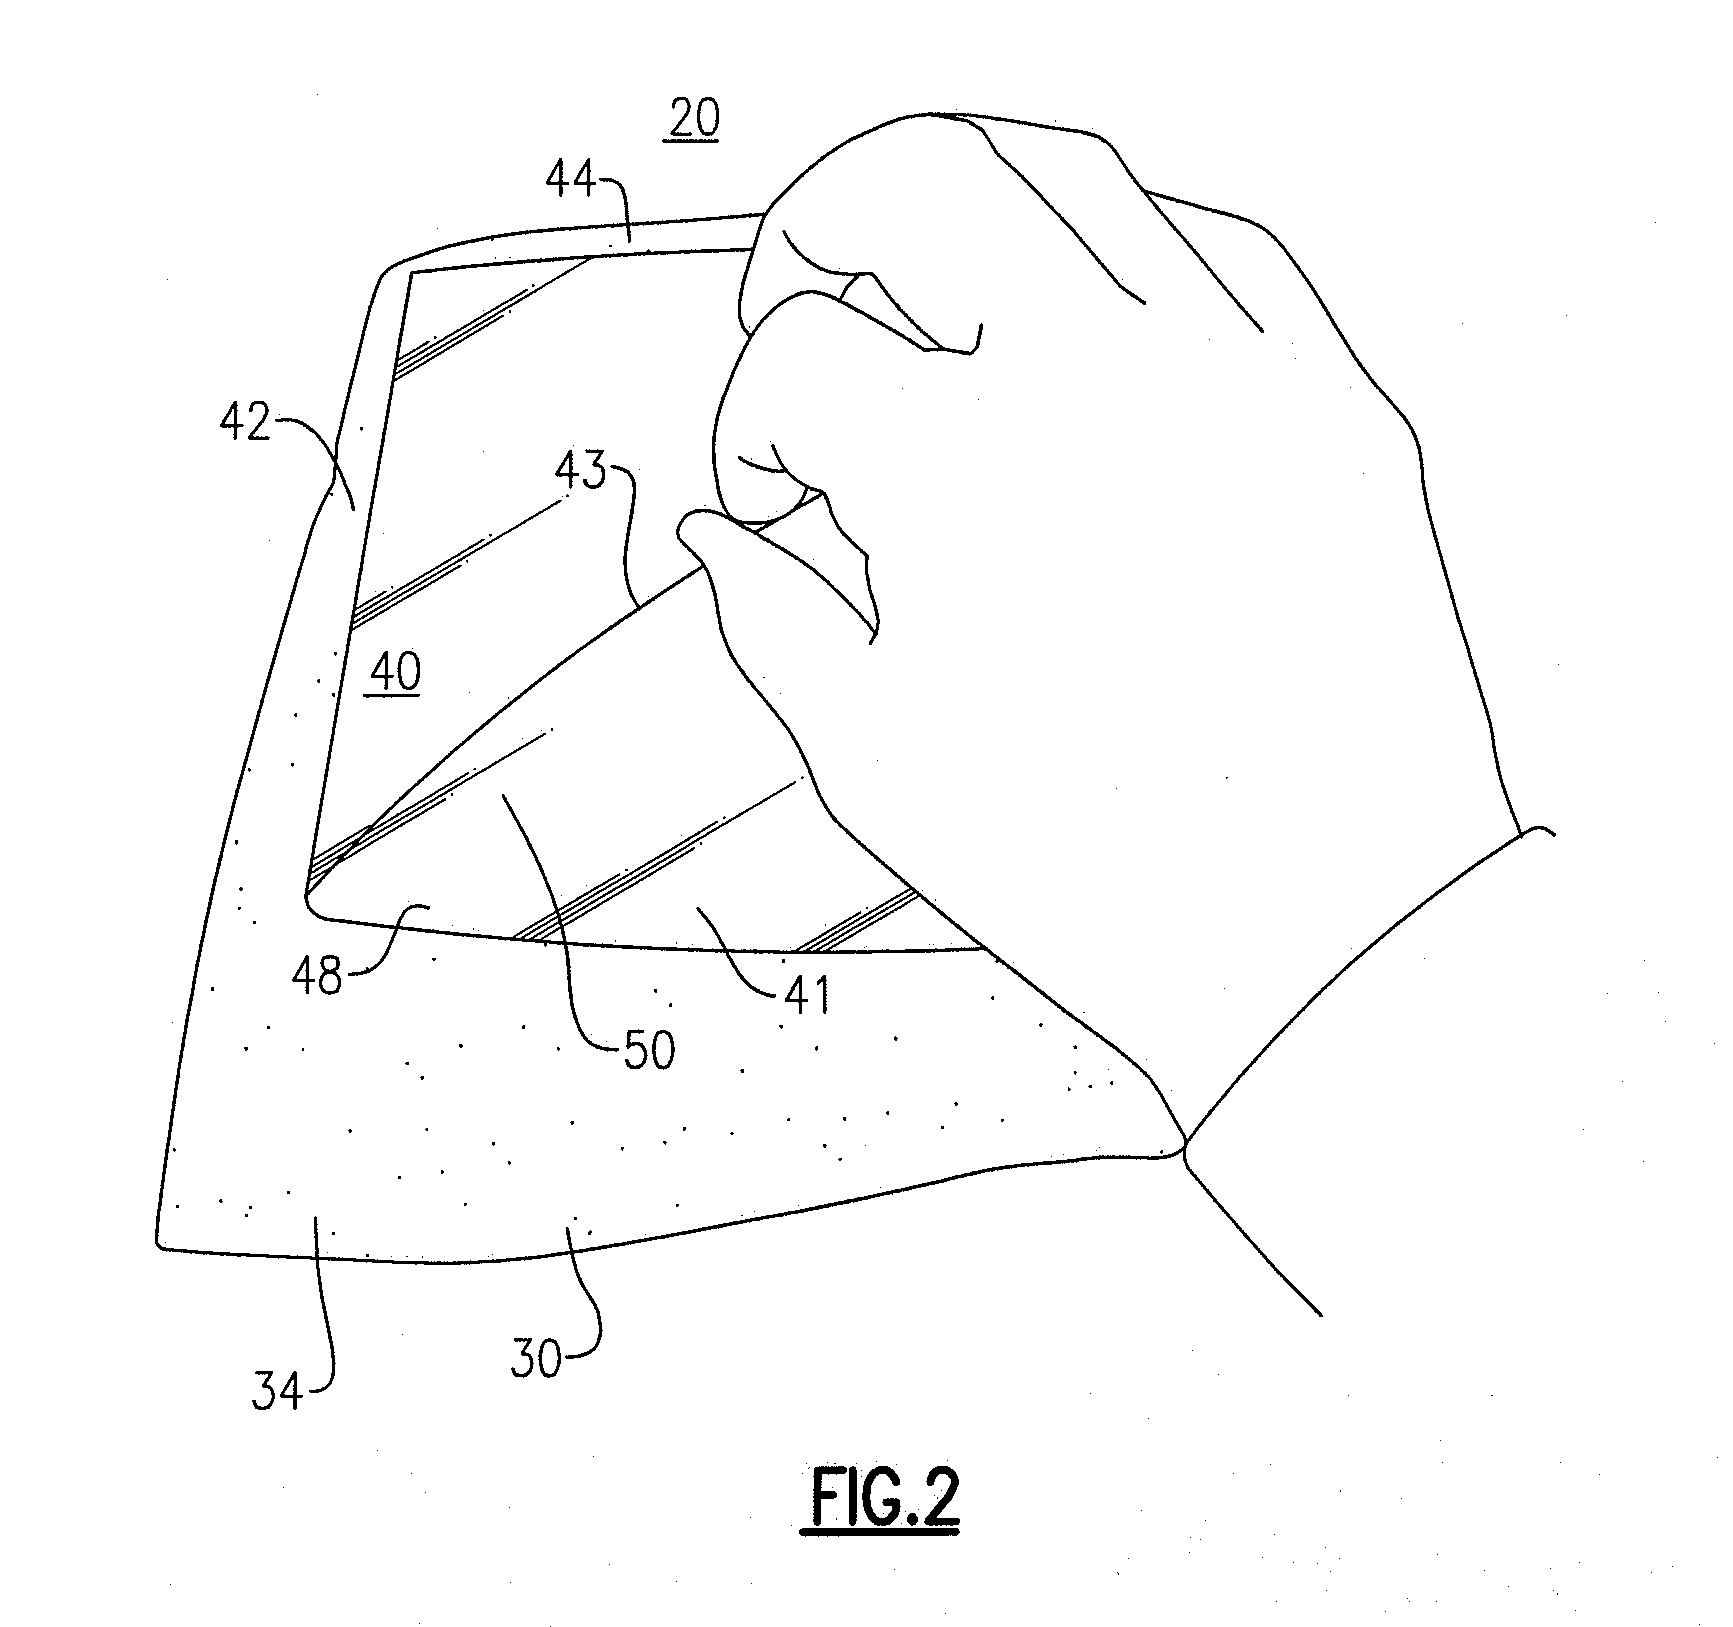 Latent fingerprint powder applicator and related method of use